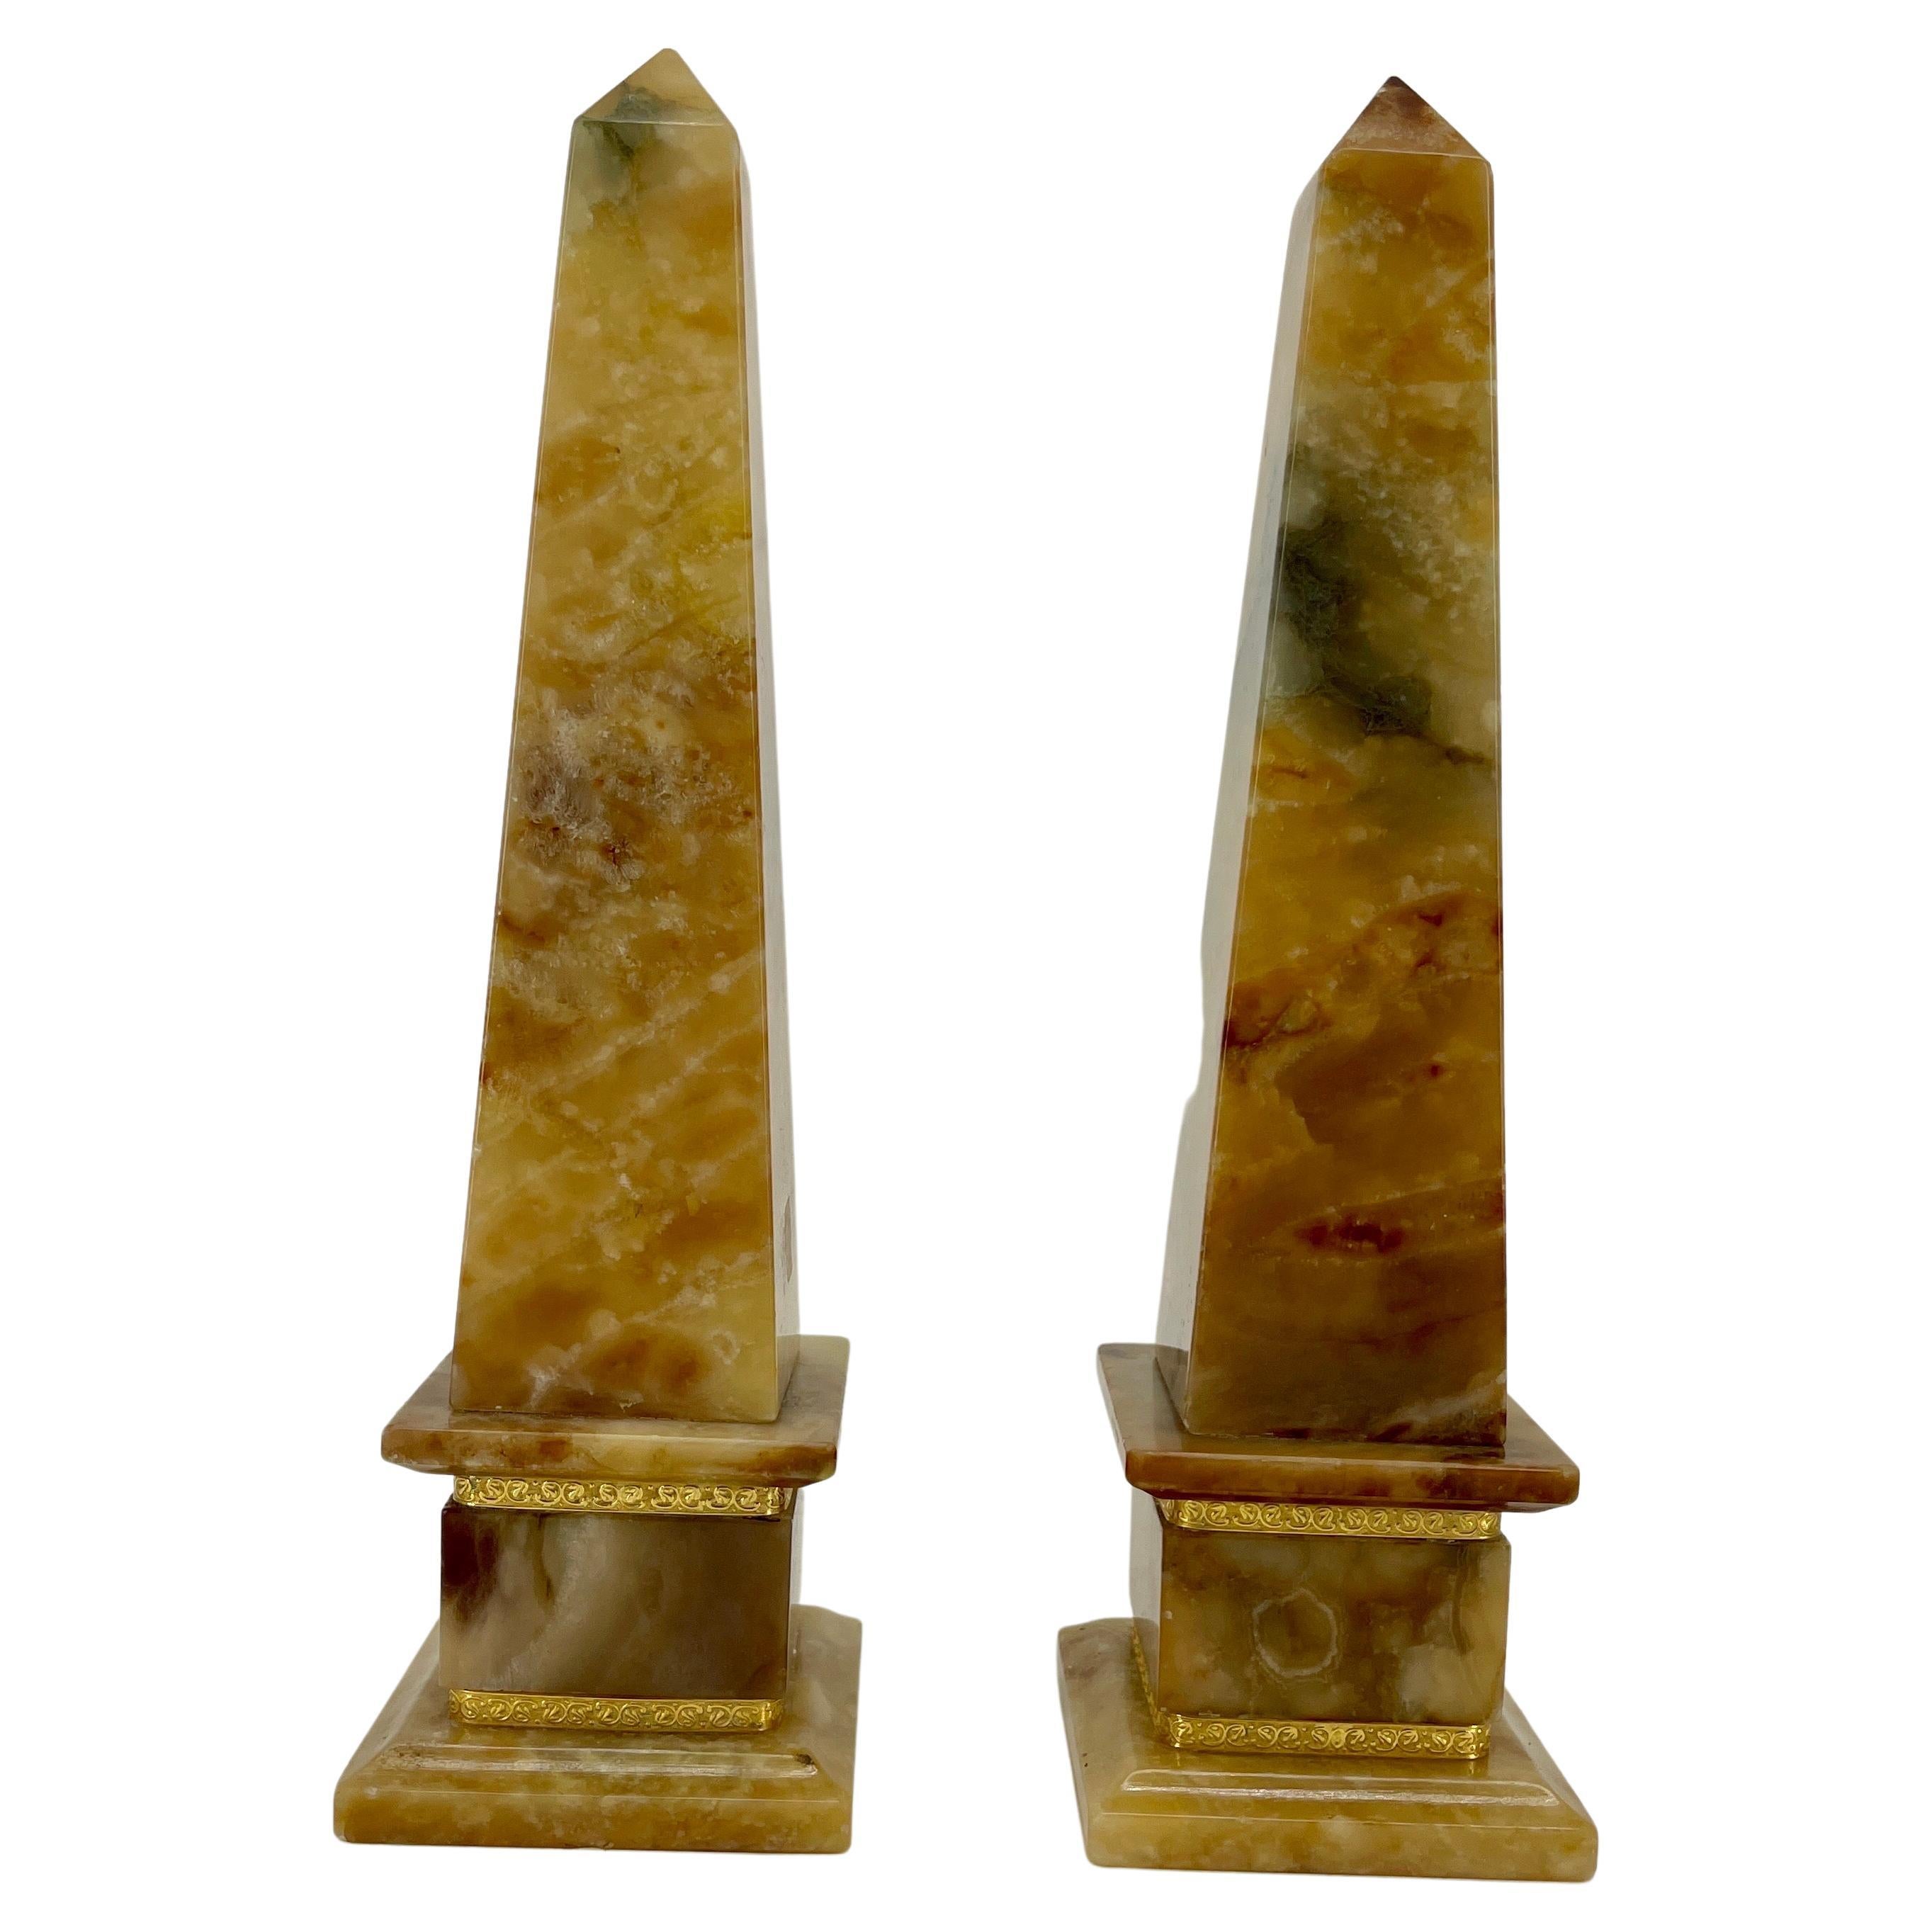 Italian Pair of Hollywood Regency Style Obelisks in Marble with Two Gilded Bands around the Bases, circa 1960s.